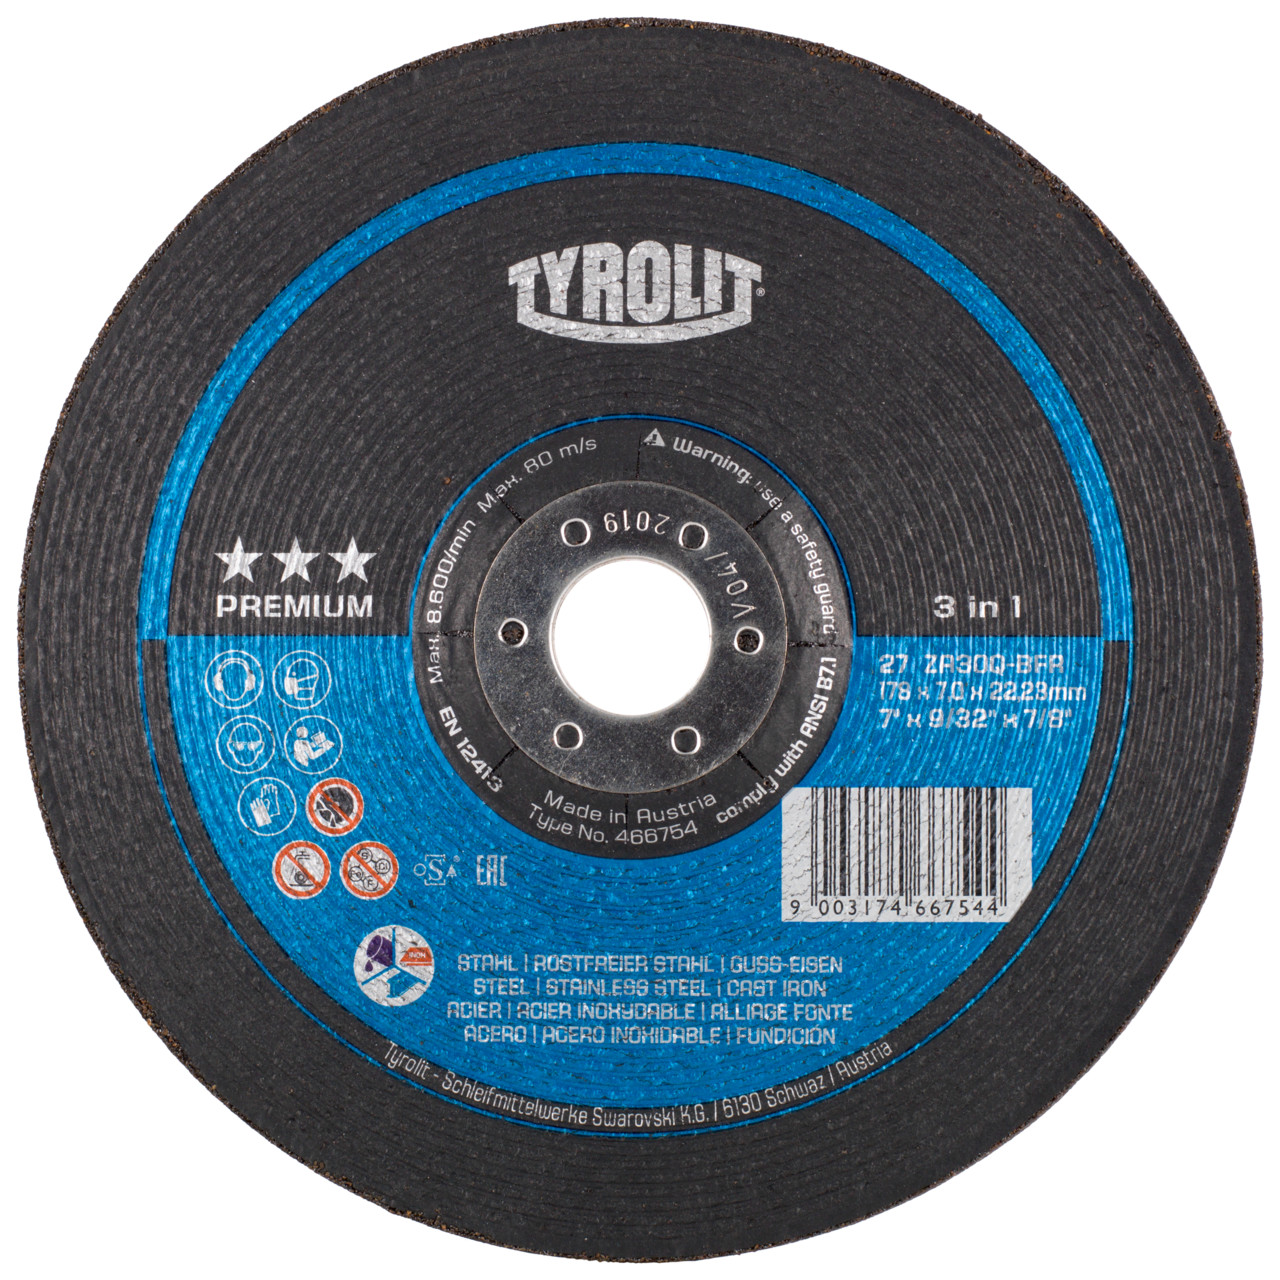 TYROLIT grinding disc DxUxH 178x7x22.23 3in1 for steel and stainless steel and cast iron, shape: 27 - offset version, Art. 466754